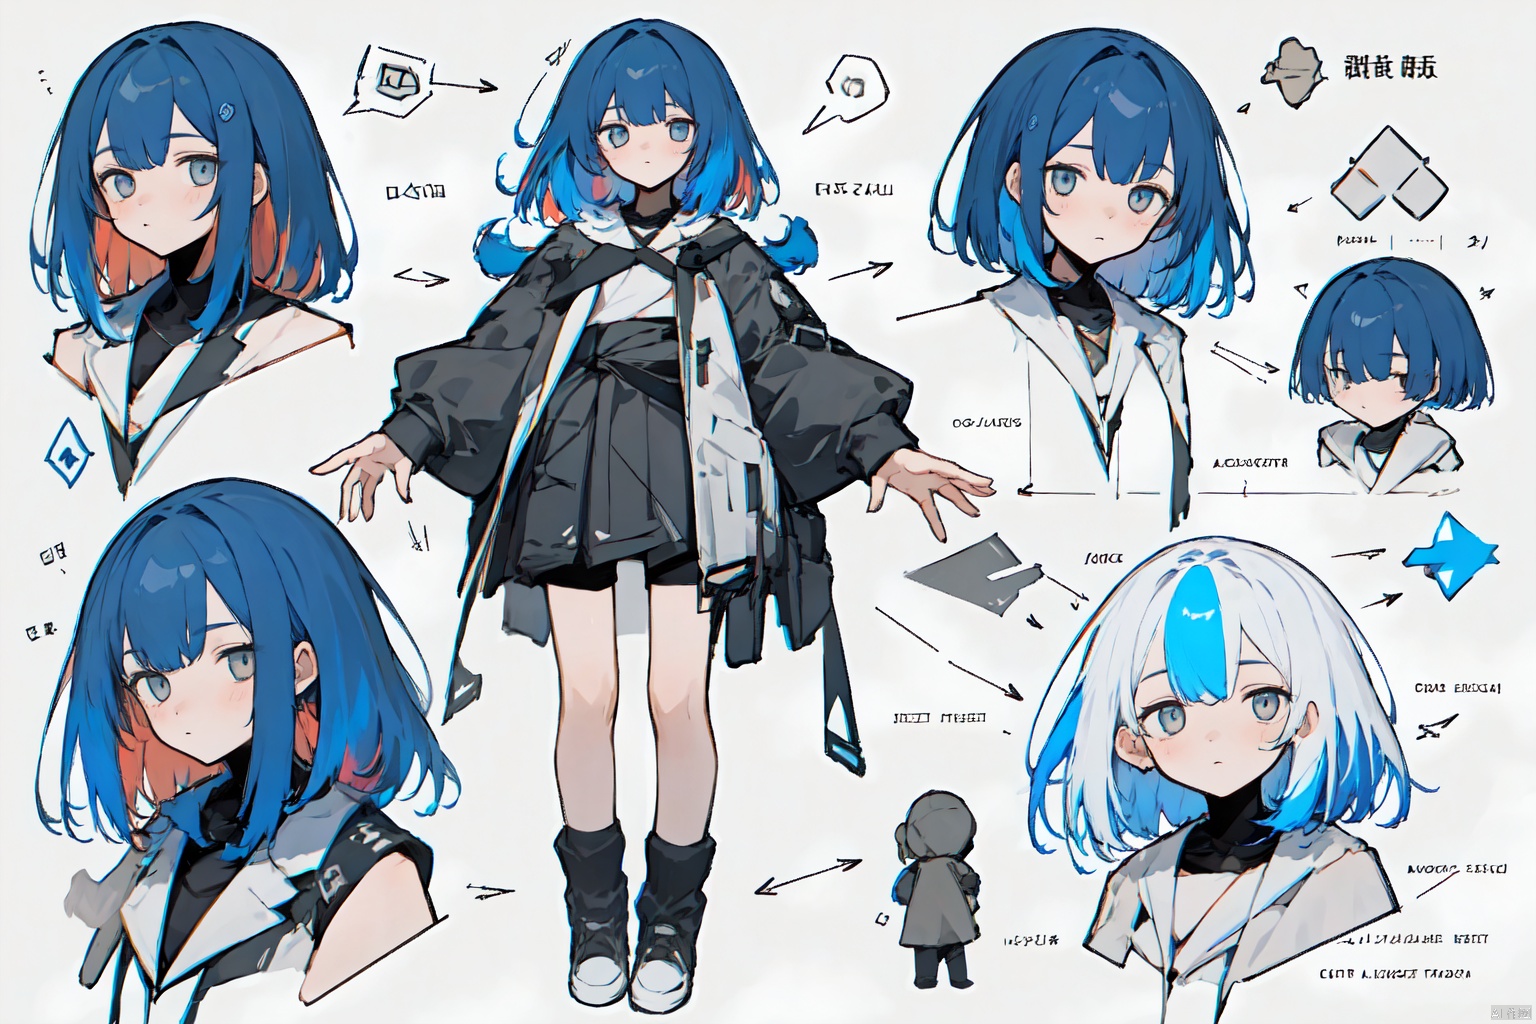  girl, multi-view, hair, Pure color background, different movements, Diagram, word,Multi-view,Colored hair, character designs, original characters,a complex design,Half body,The whole body